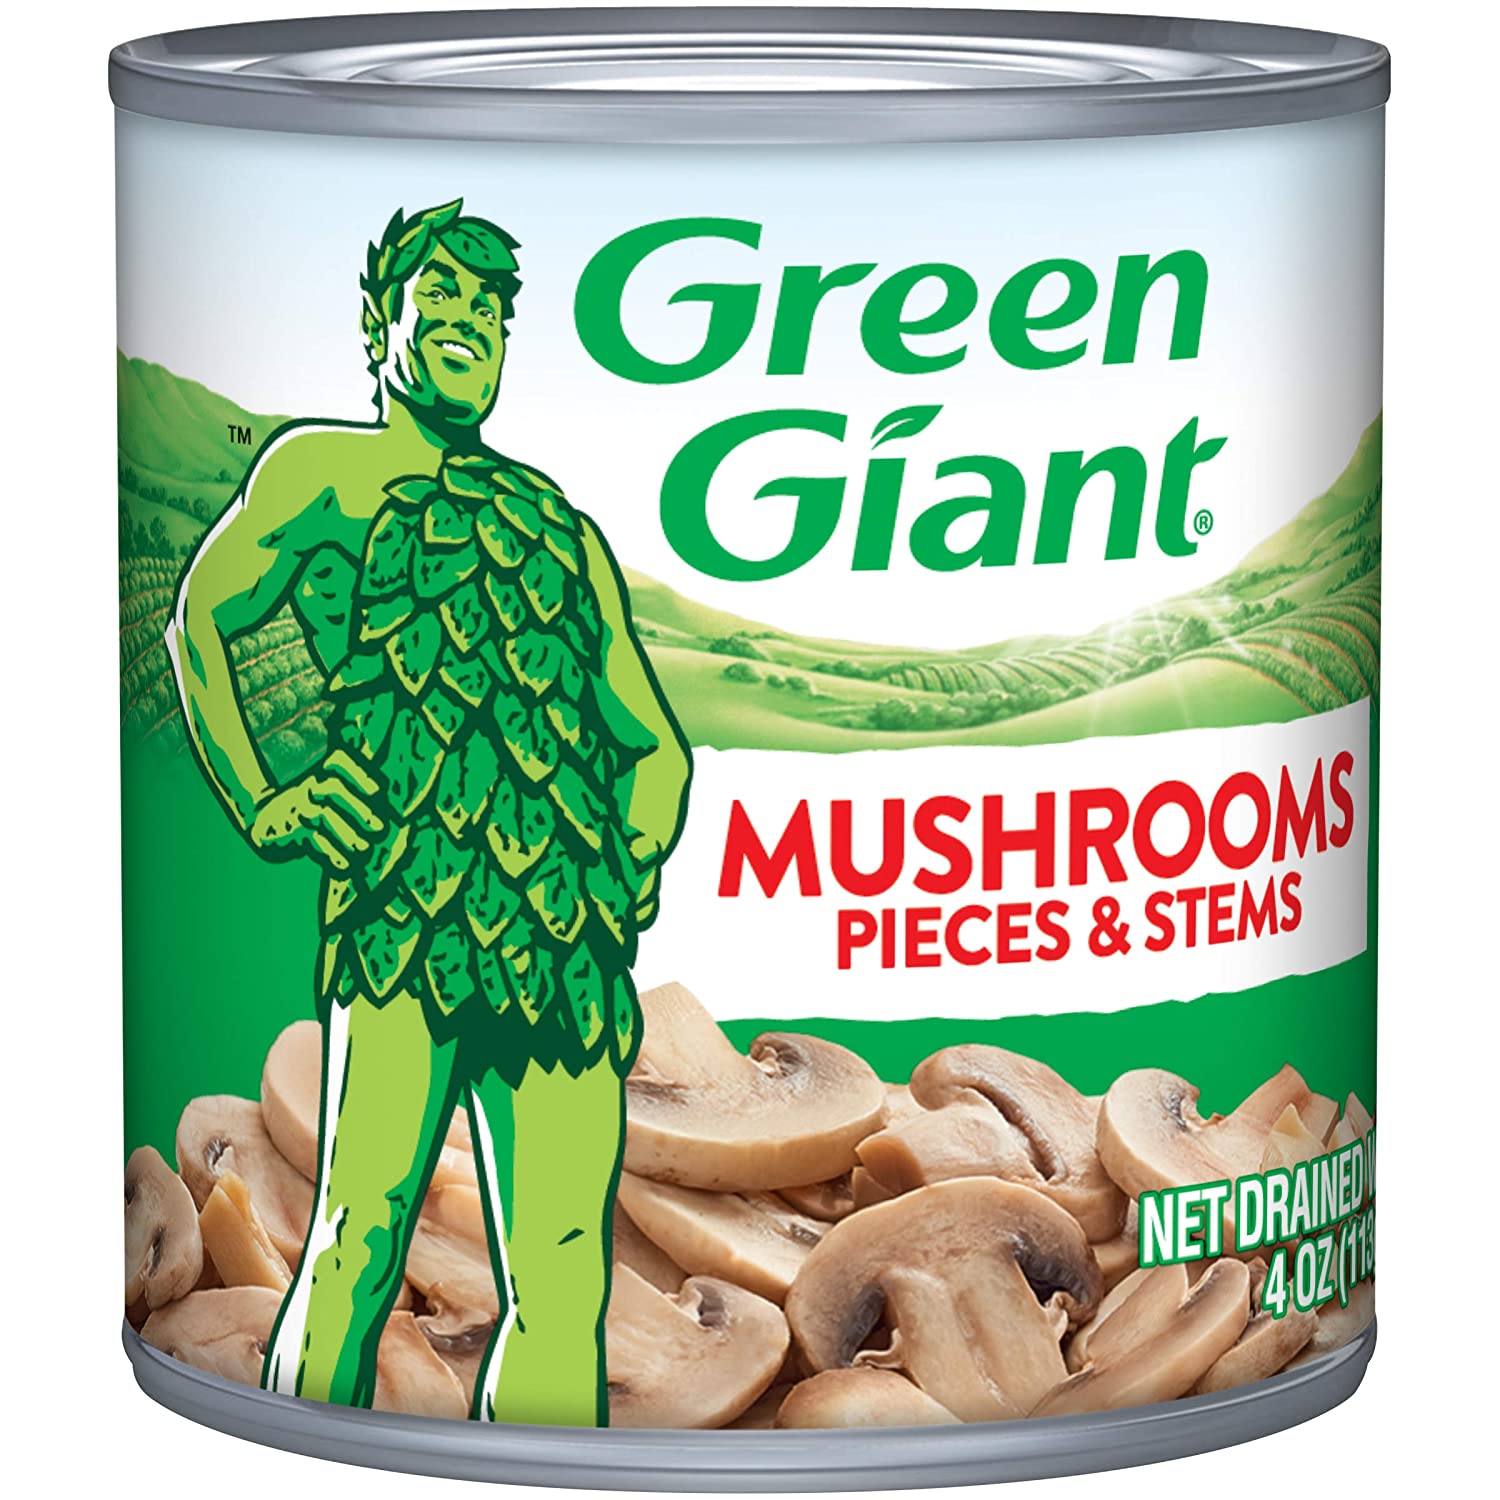 stl>Green Giant Mushroom Pieces and Stems - 1 can - 14oz